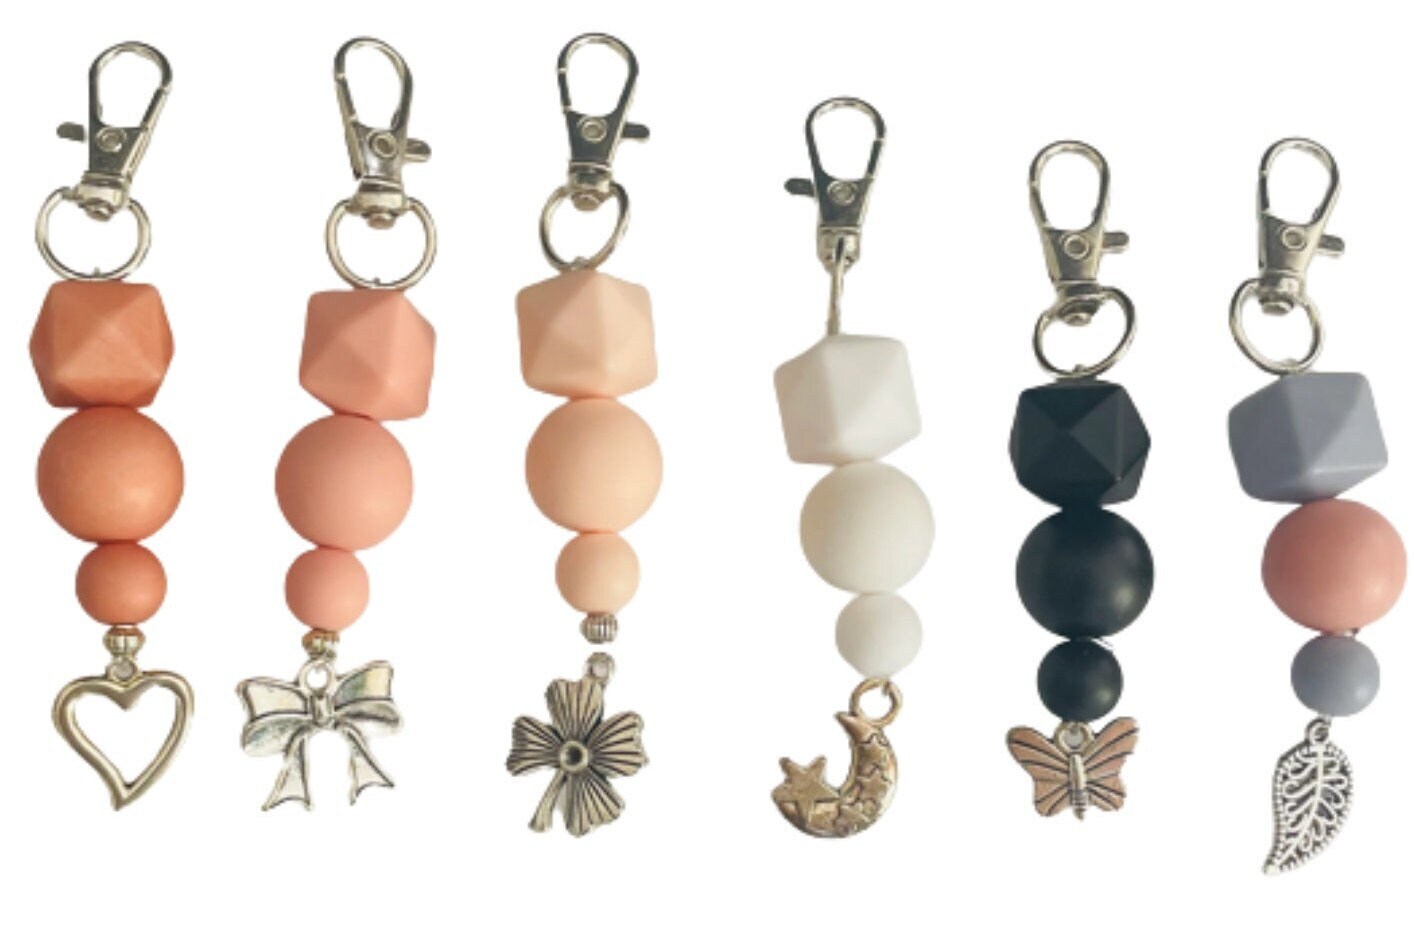 Lobster Clip Keyring (Silver Plated) | The Whimsical Bead